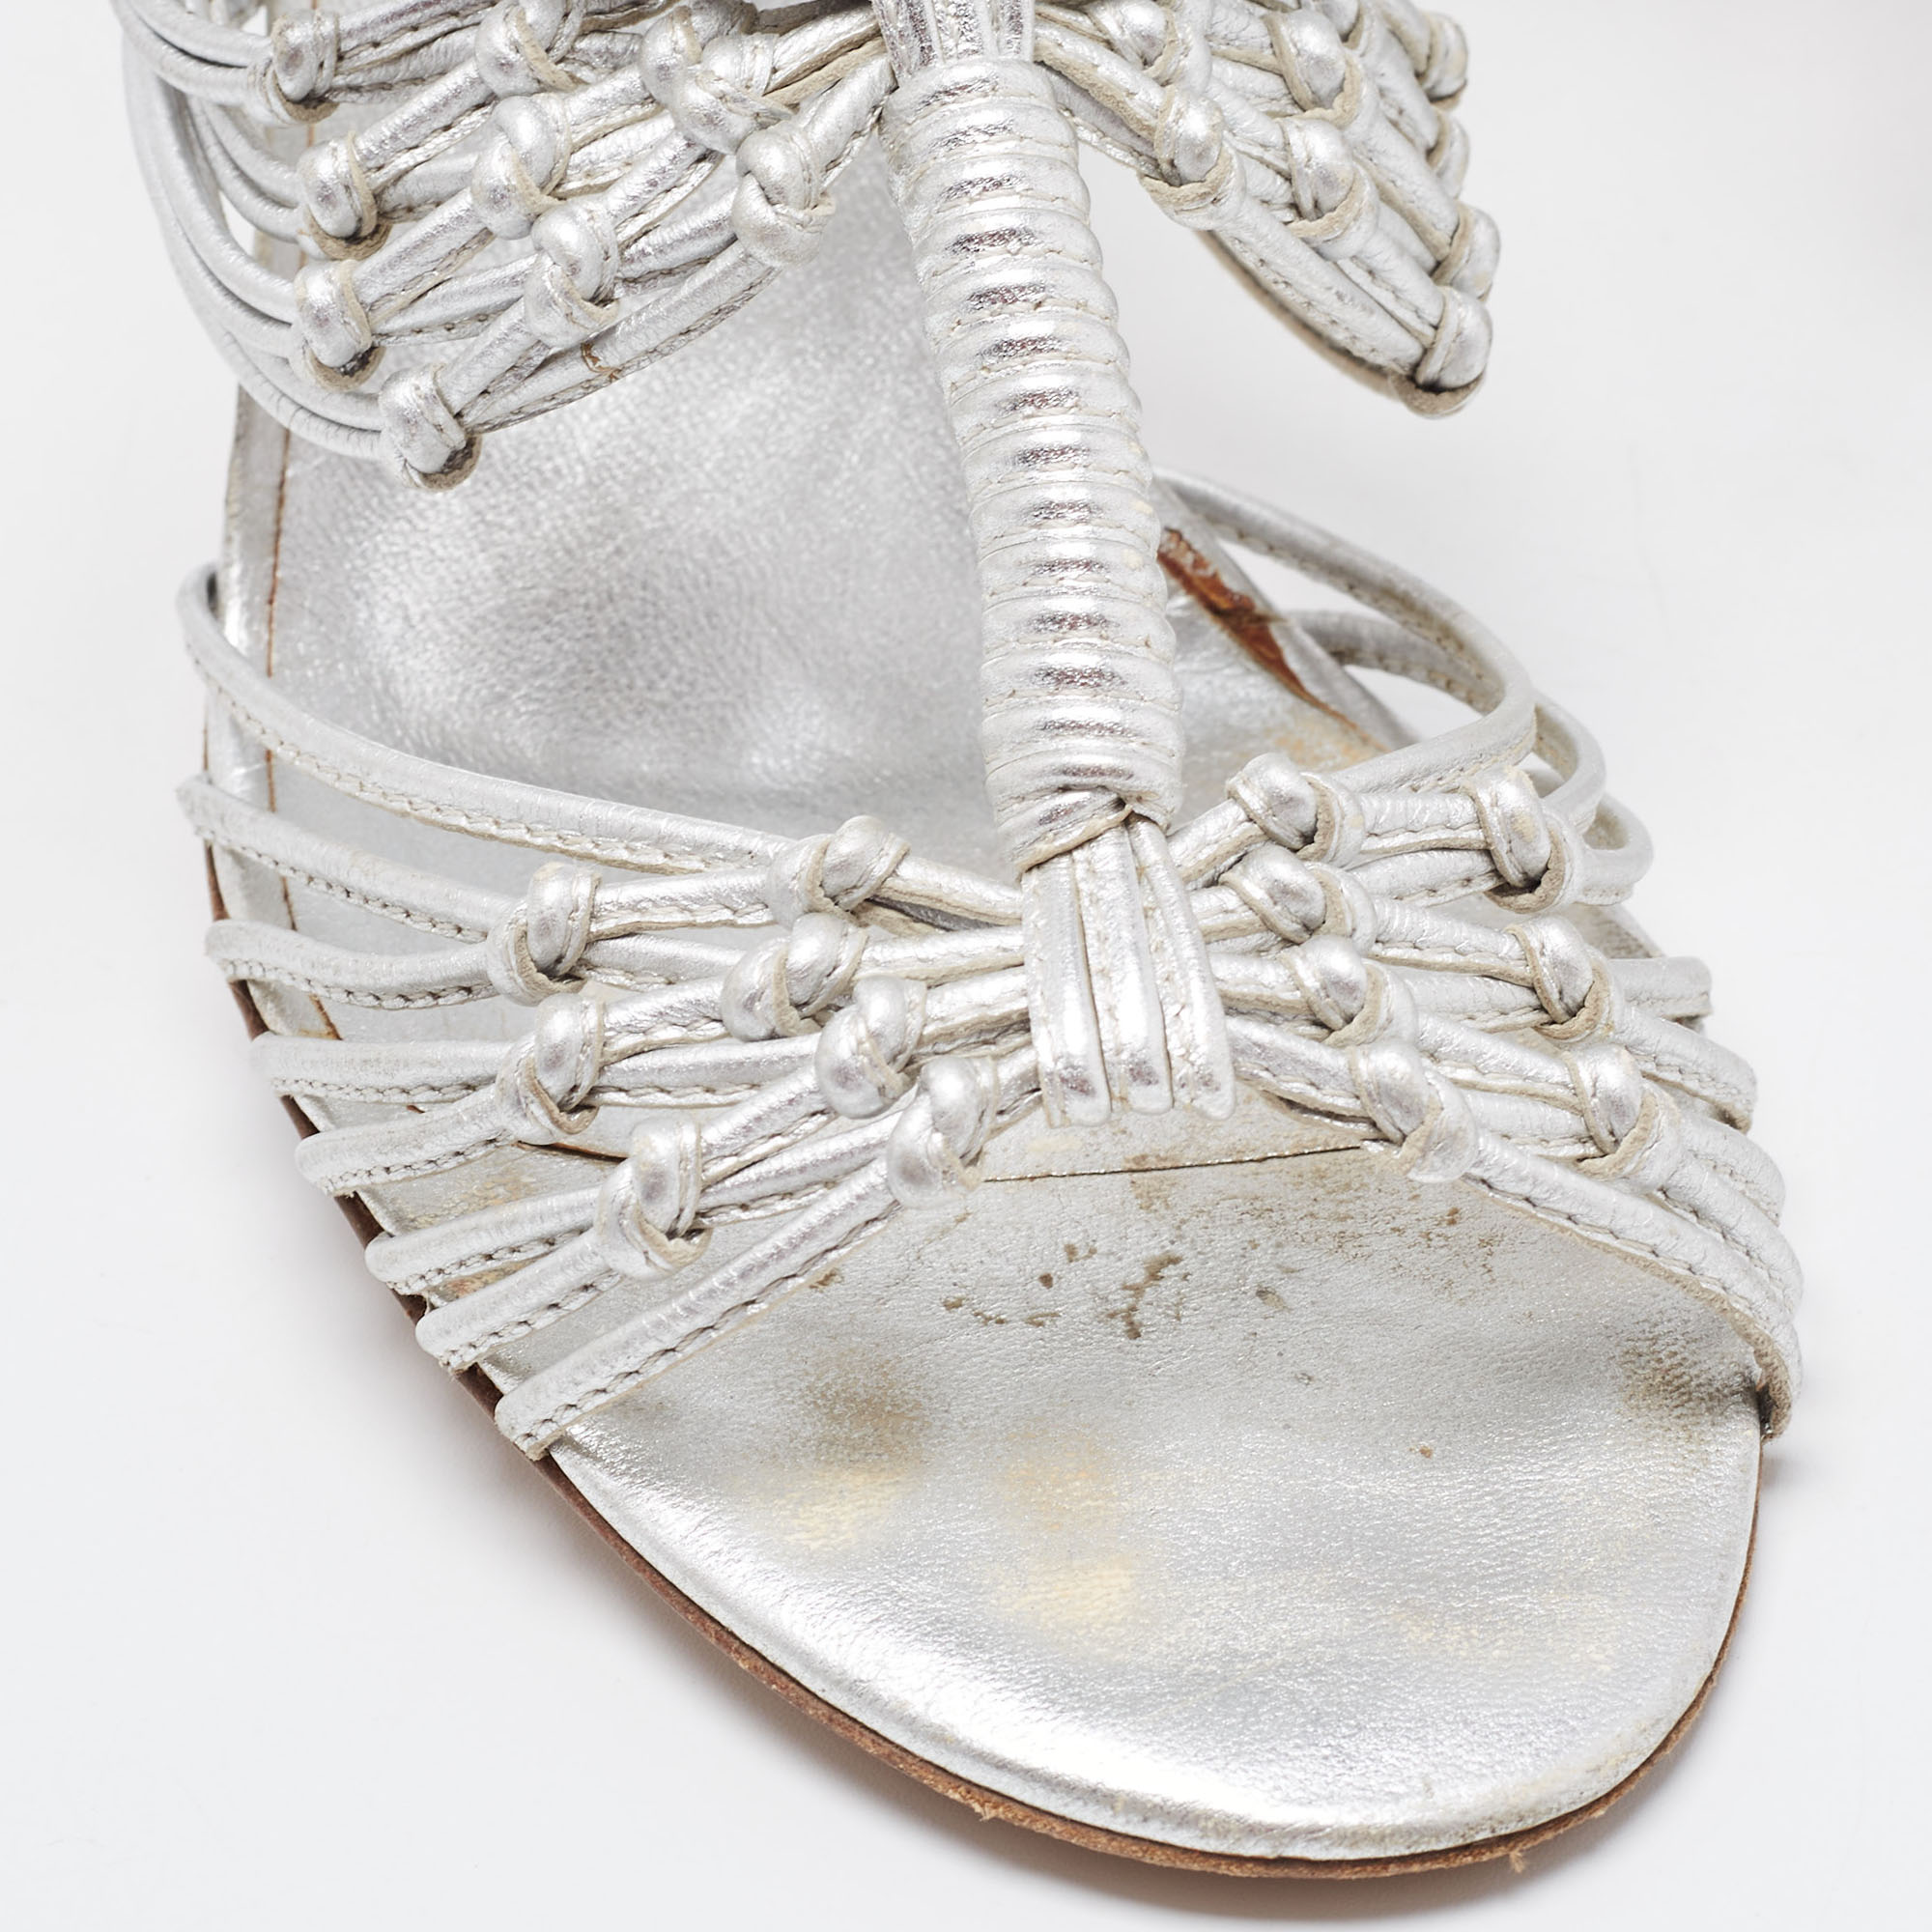 Chanel Silver Knotted Leather CC Ankle Strap Sandals 38.5